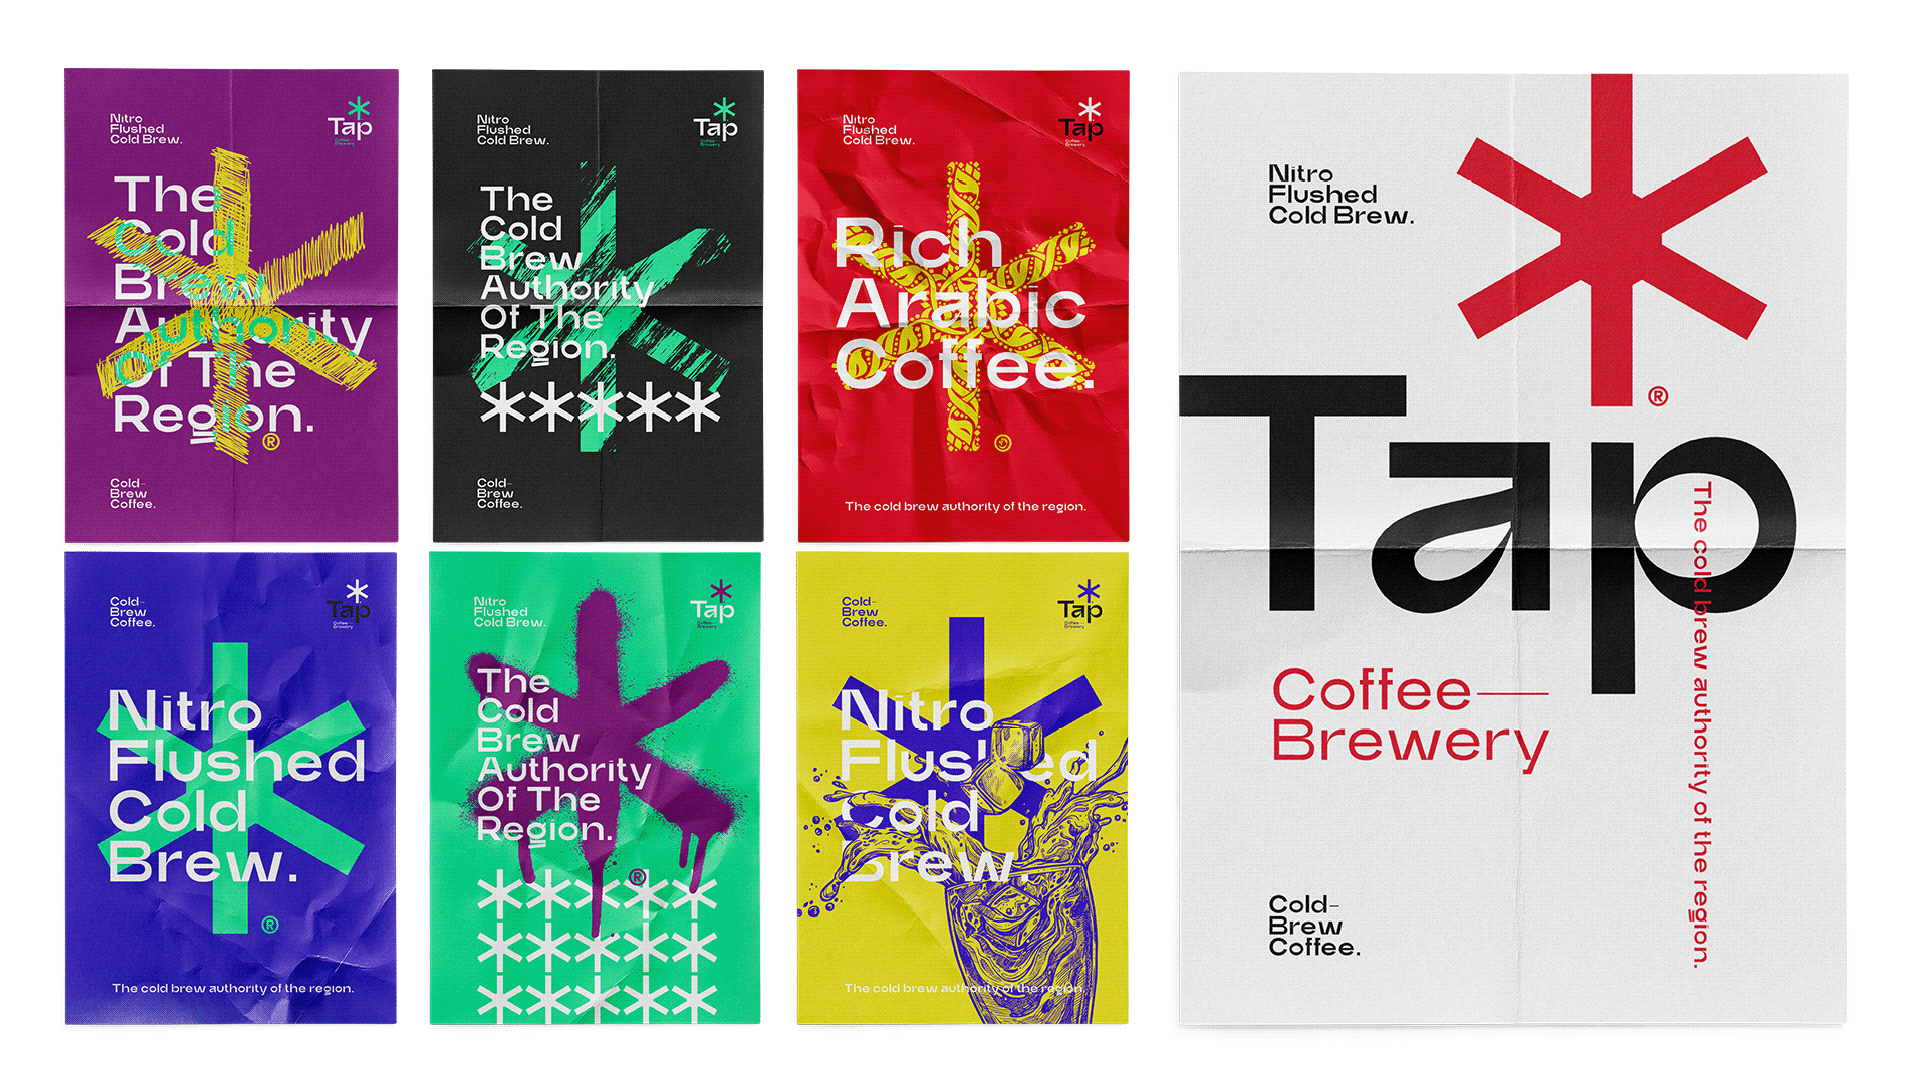 TAP Coffee Brewery on Behance49127a91907537.5e3d8761df84d.png